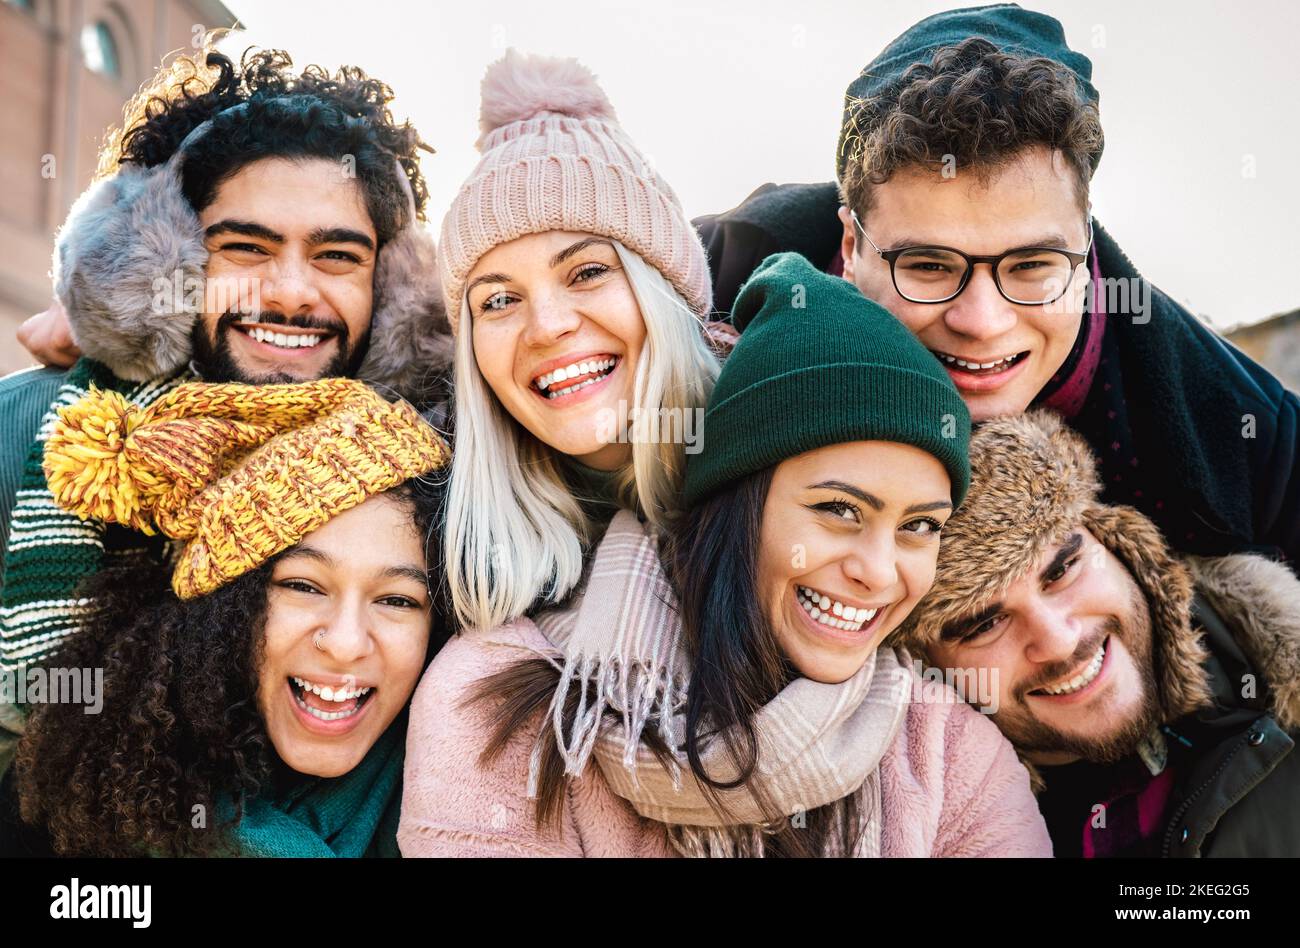 International guys and girls taking funny selfie on warm fashion clothes - Happy life style concept with millenial people having fun together out side Stock Photo